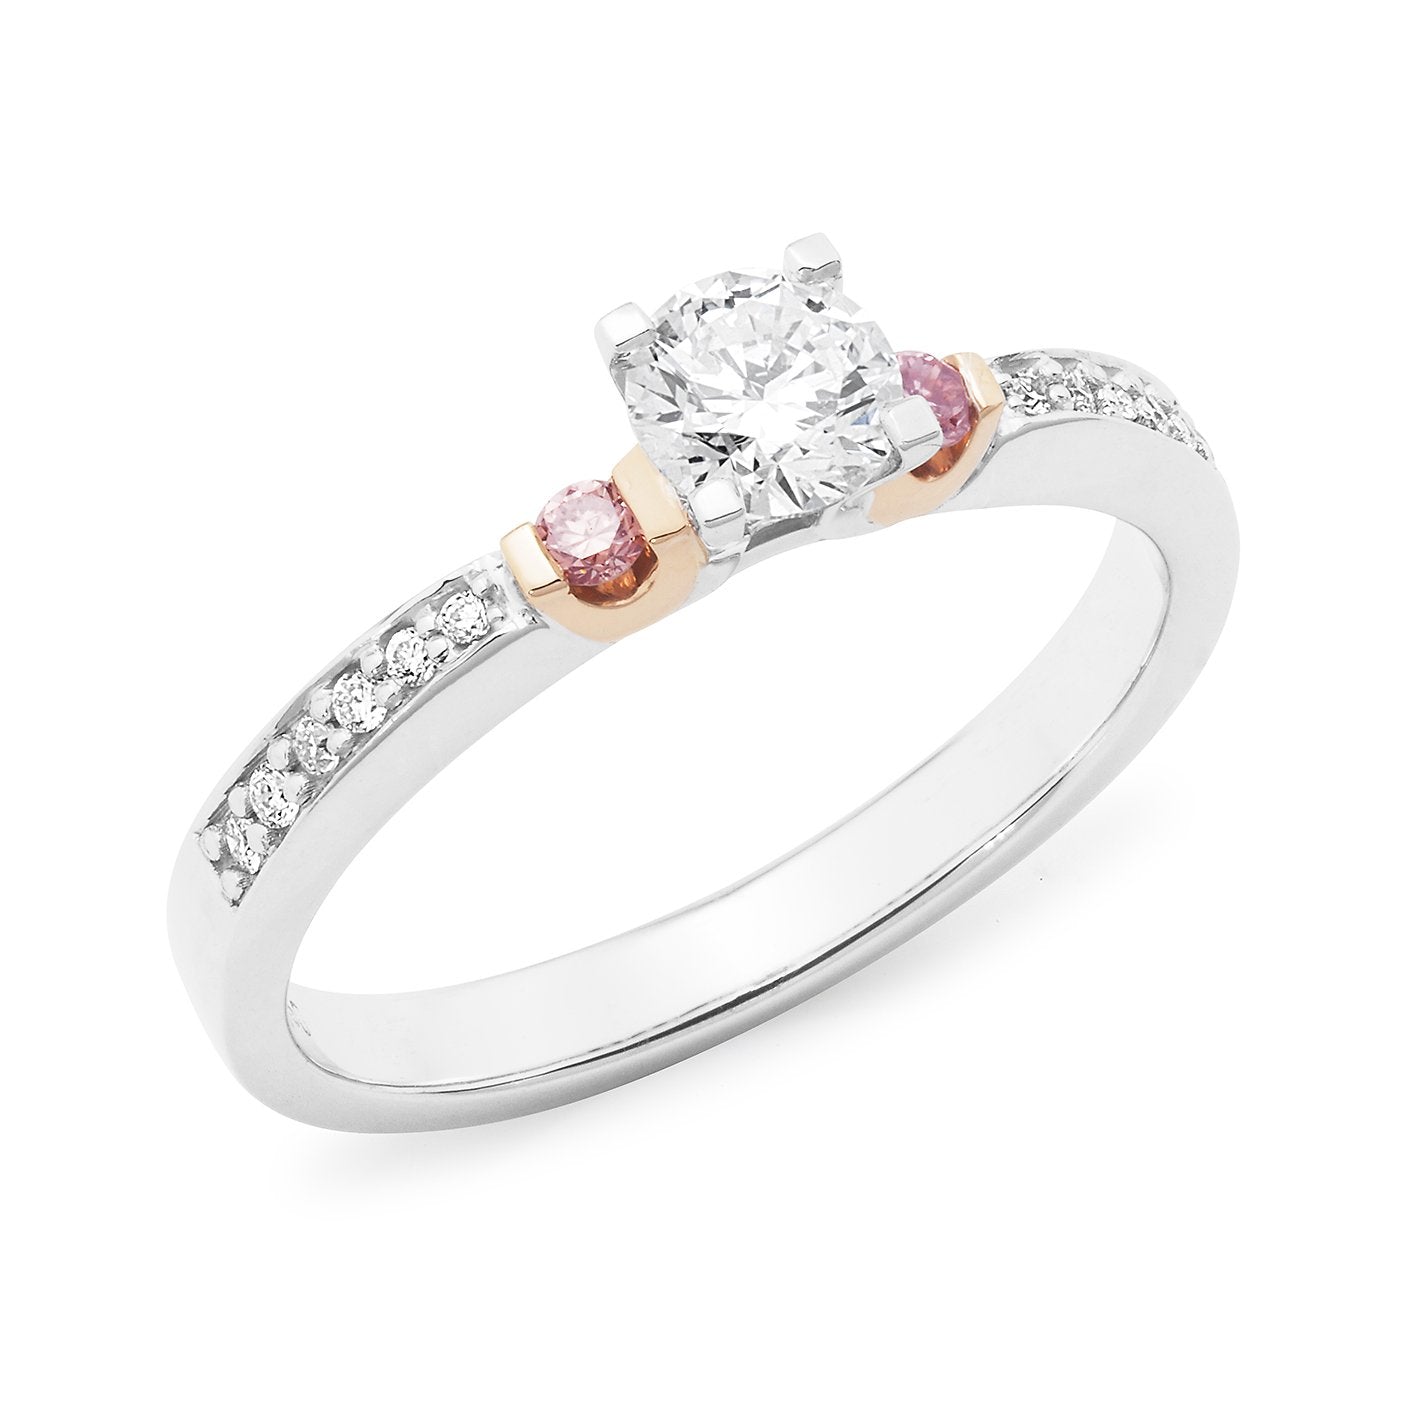 PINK CAVIAR 0.565ct White Round Brilliant Cut & Pink Diamond Engagement Ring in 18ct White Gold